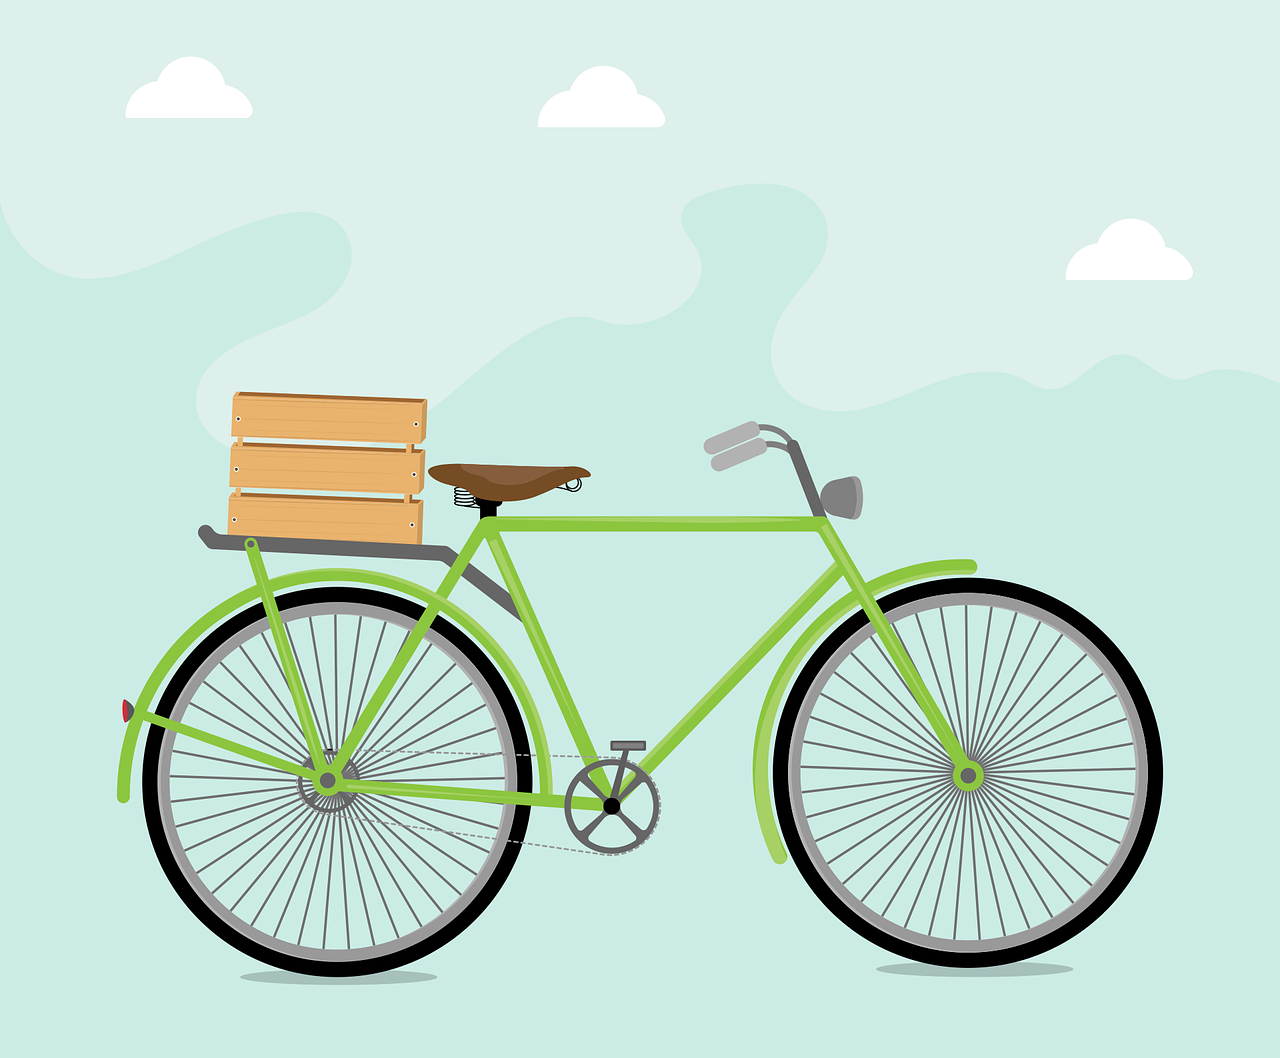 a green bicycle with a basket on the back, an illustration of, delivering parsel box, poster illustration, sleek design, bread